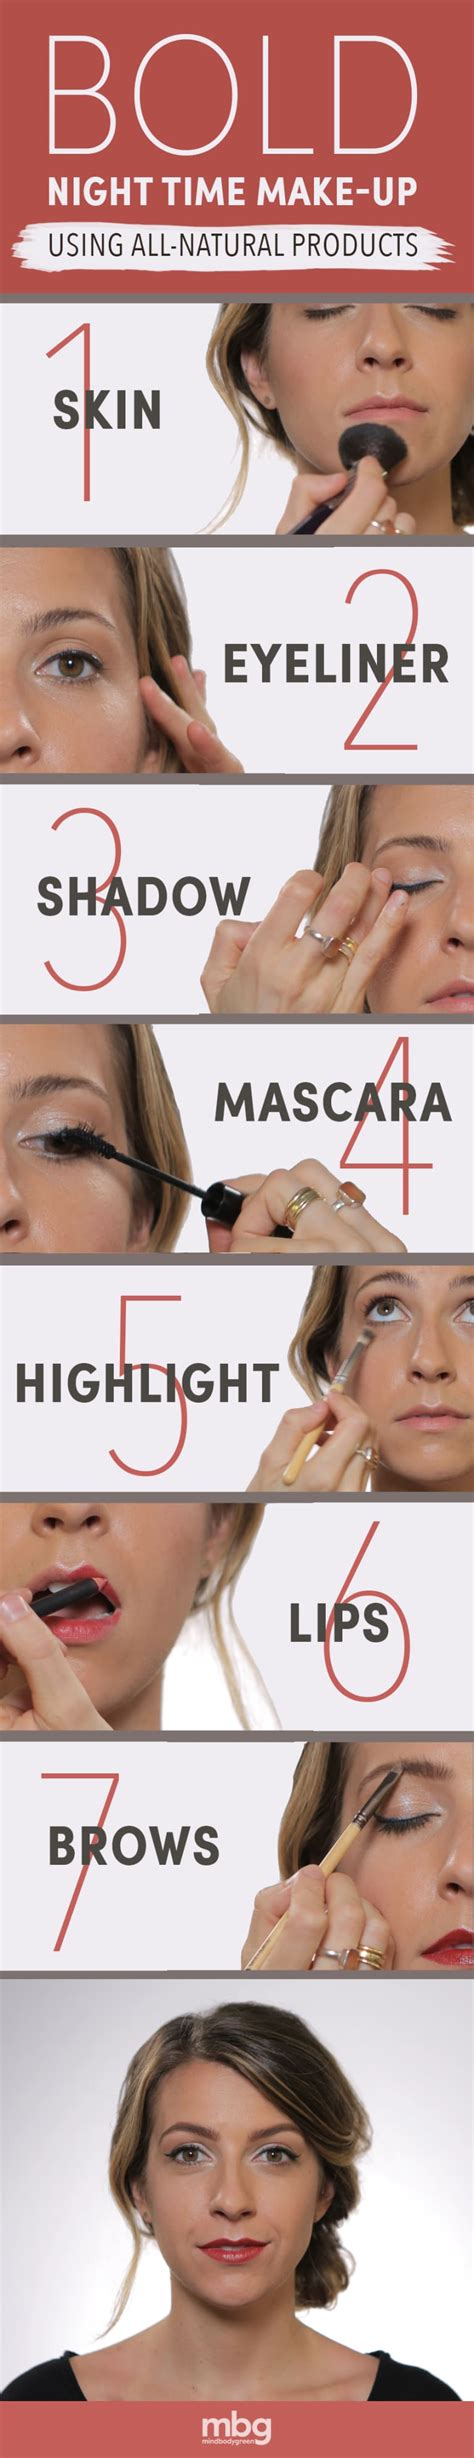 7 Easy Steps To Use Non Toxic Makeup For A Sexy Night Out Look